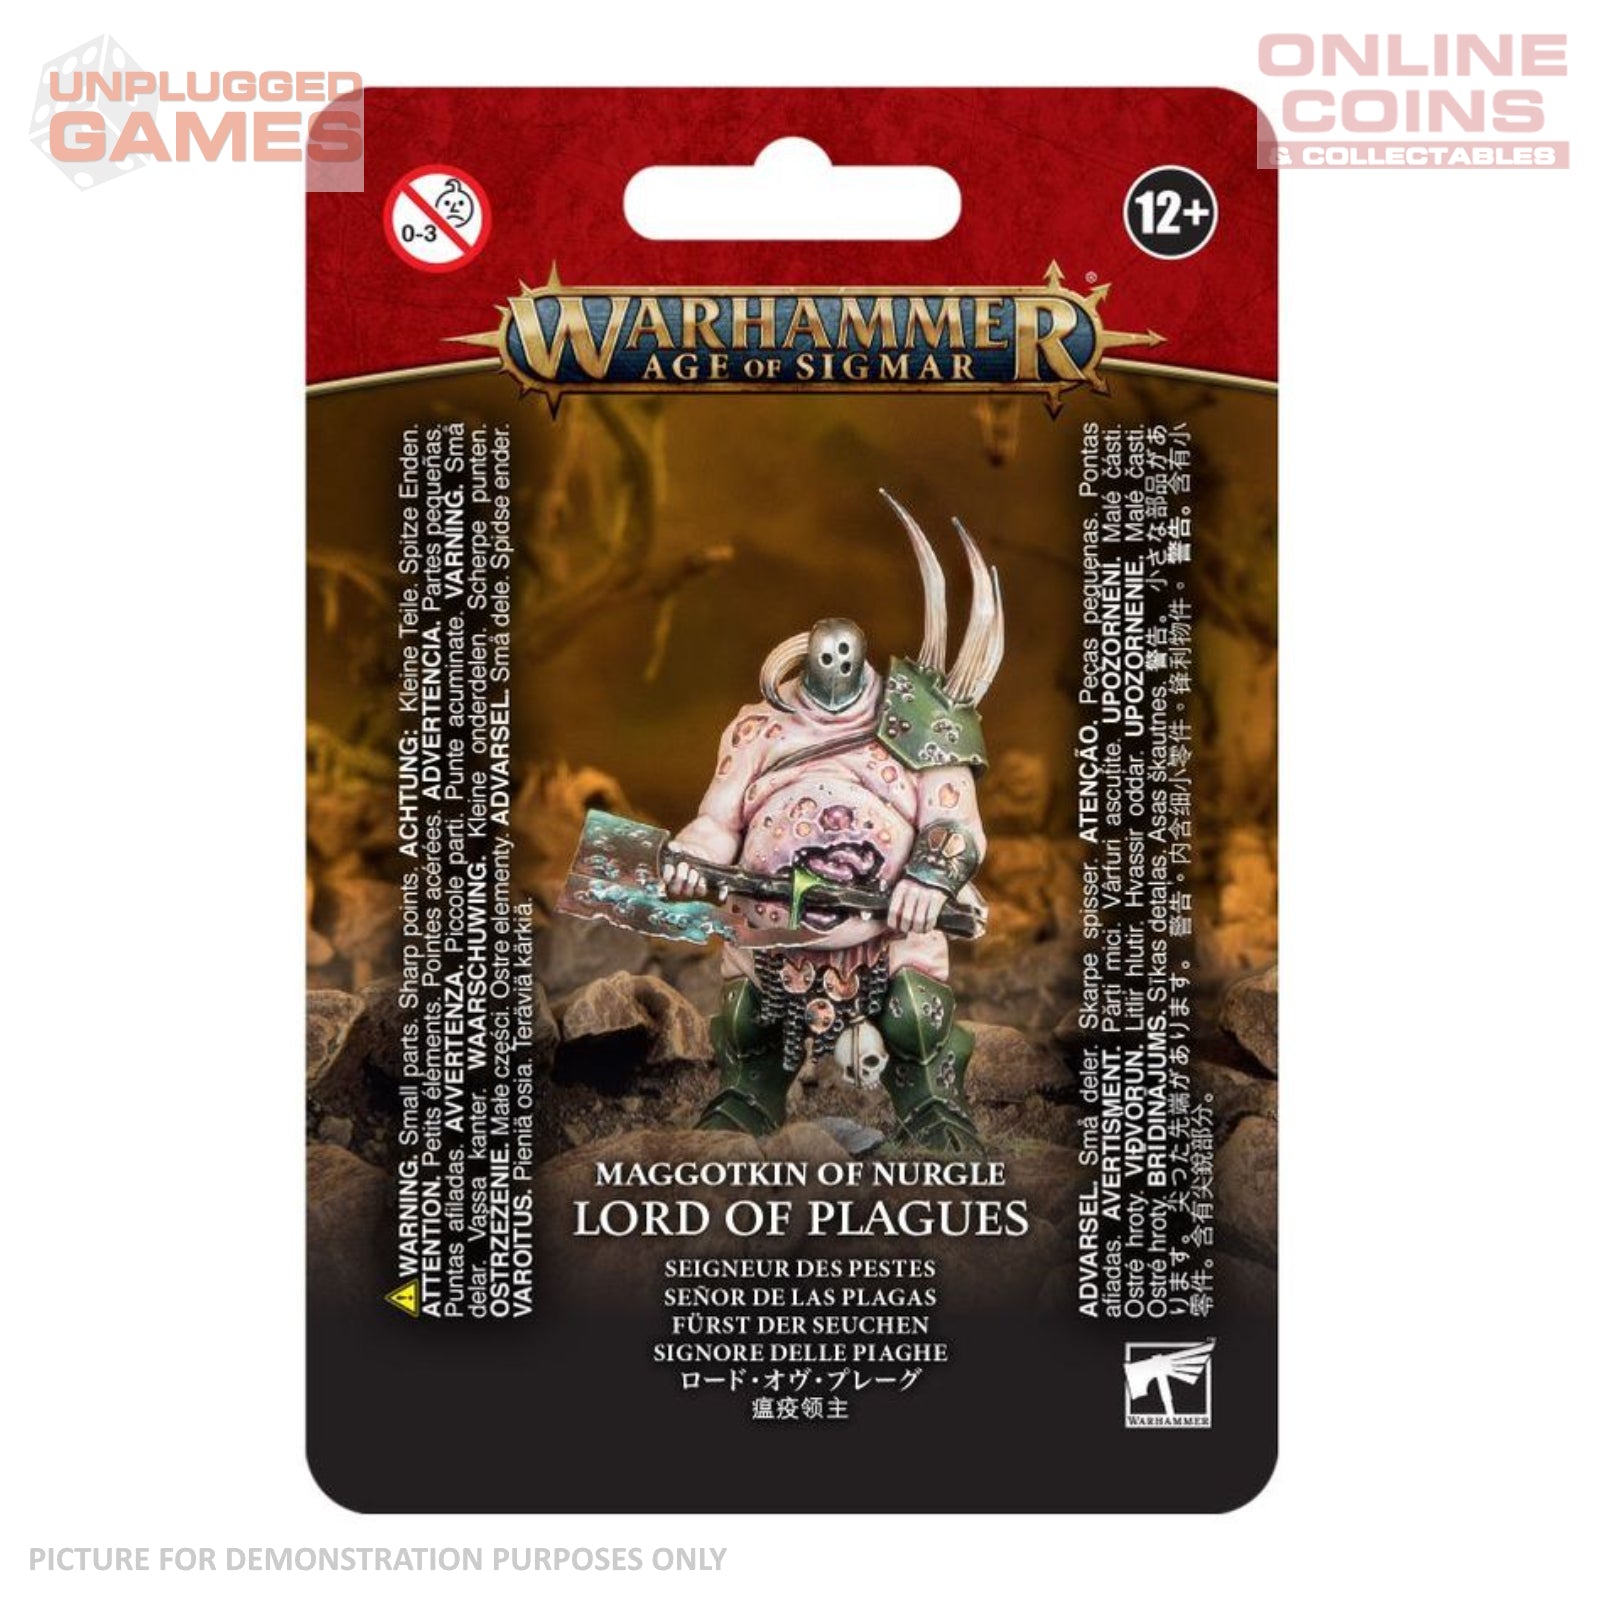 Warhammer Age of Sigmar - Maggotkin of Nurgle Lord of Plagues